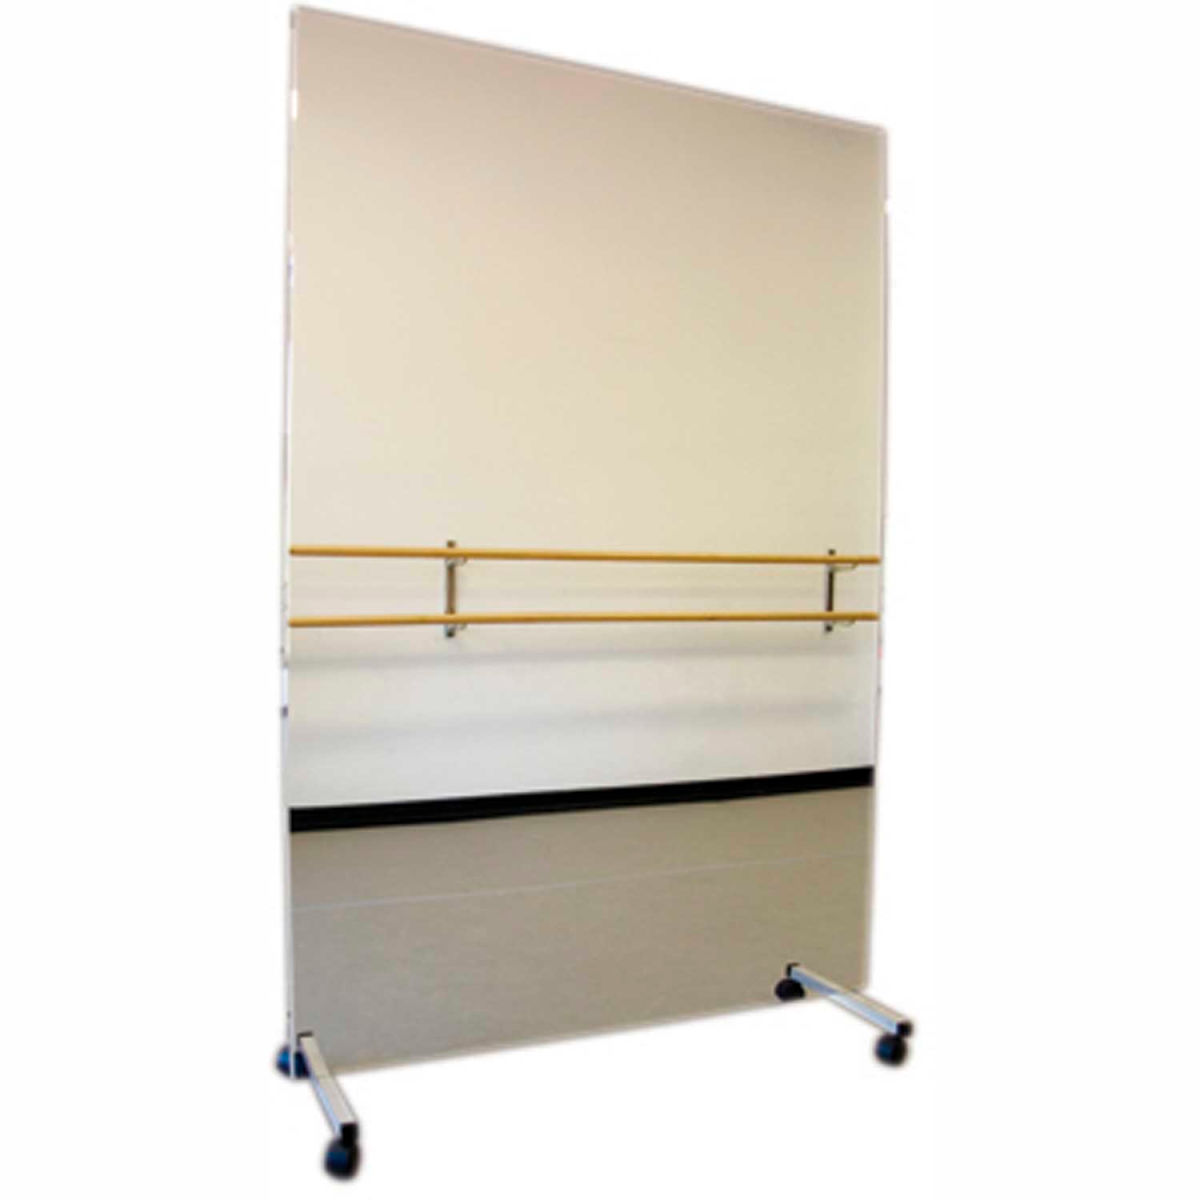 Picture of Fabrication Enterprises B2140356 Vertical Ultra-Safe Glassless Mirror with Mobile Caster Base - 60 x 96 in.